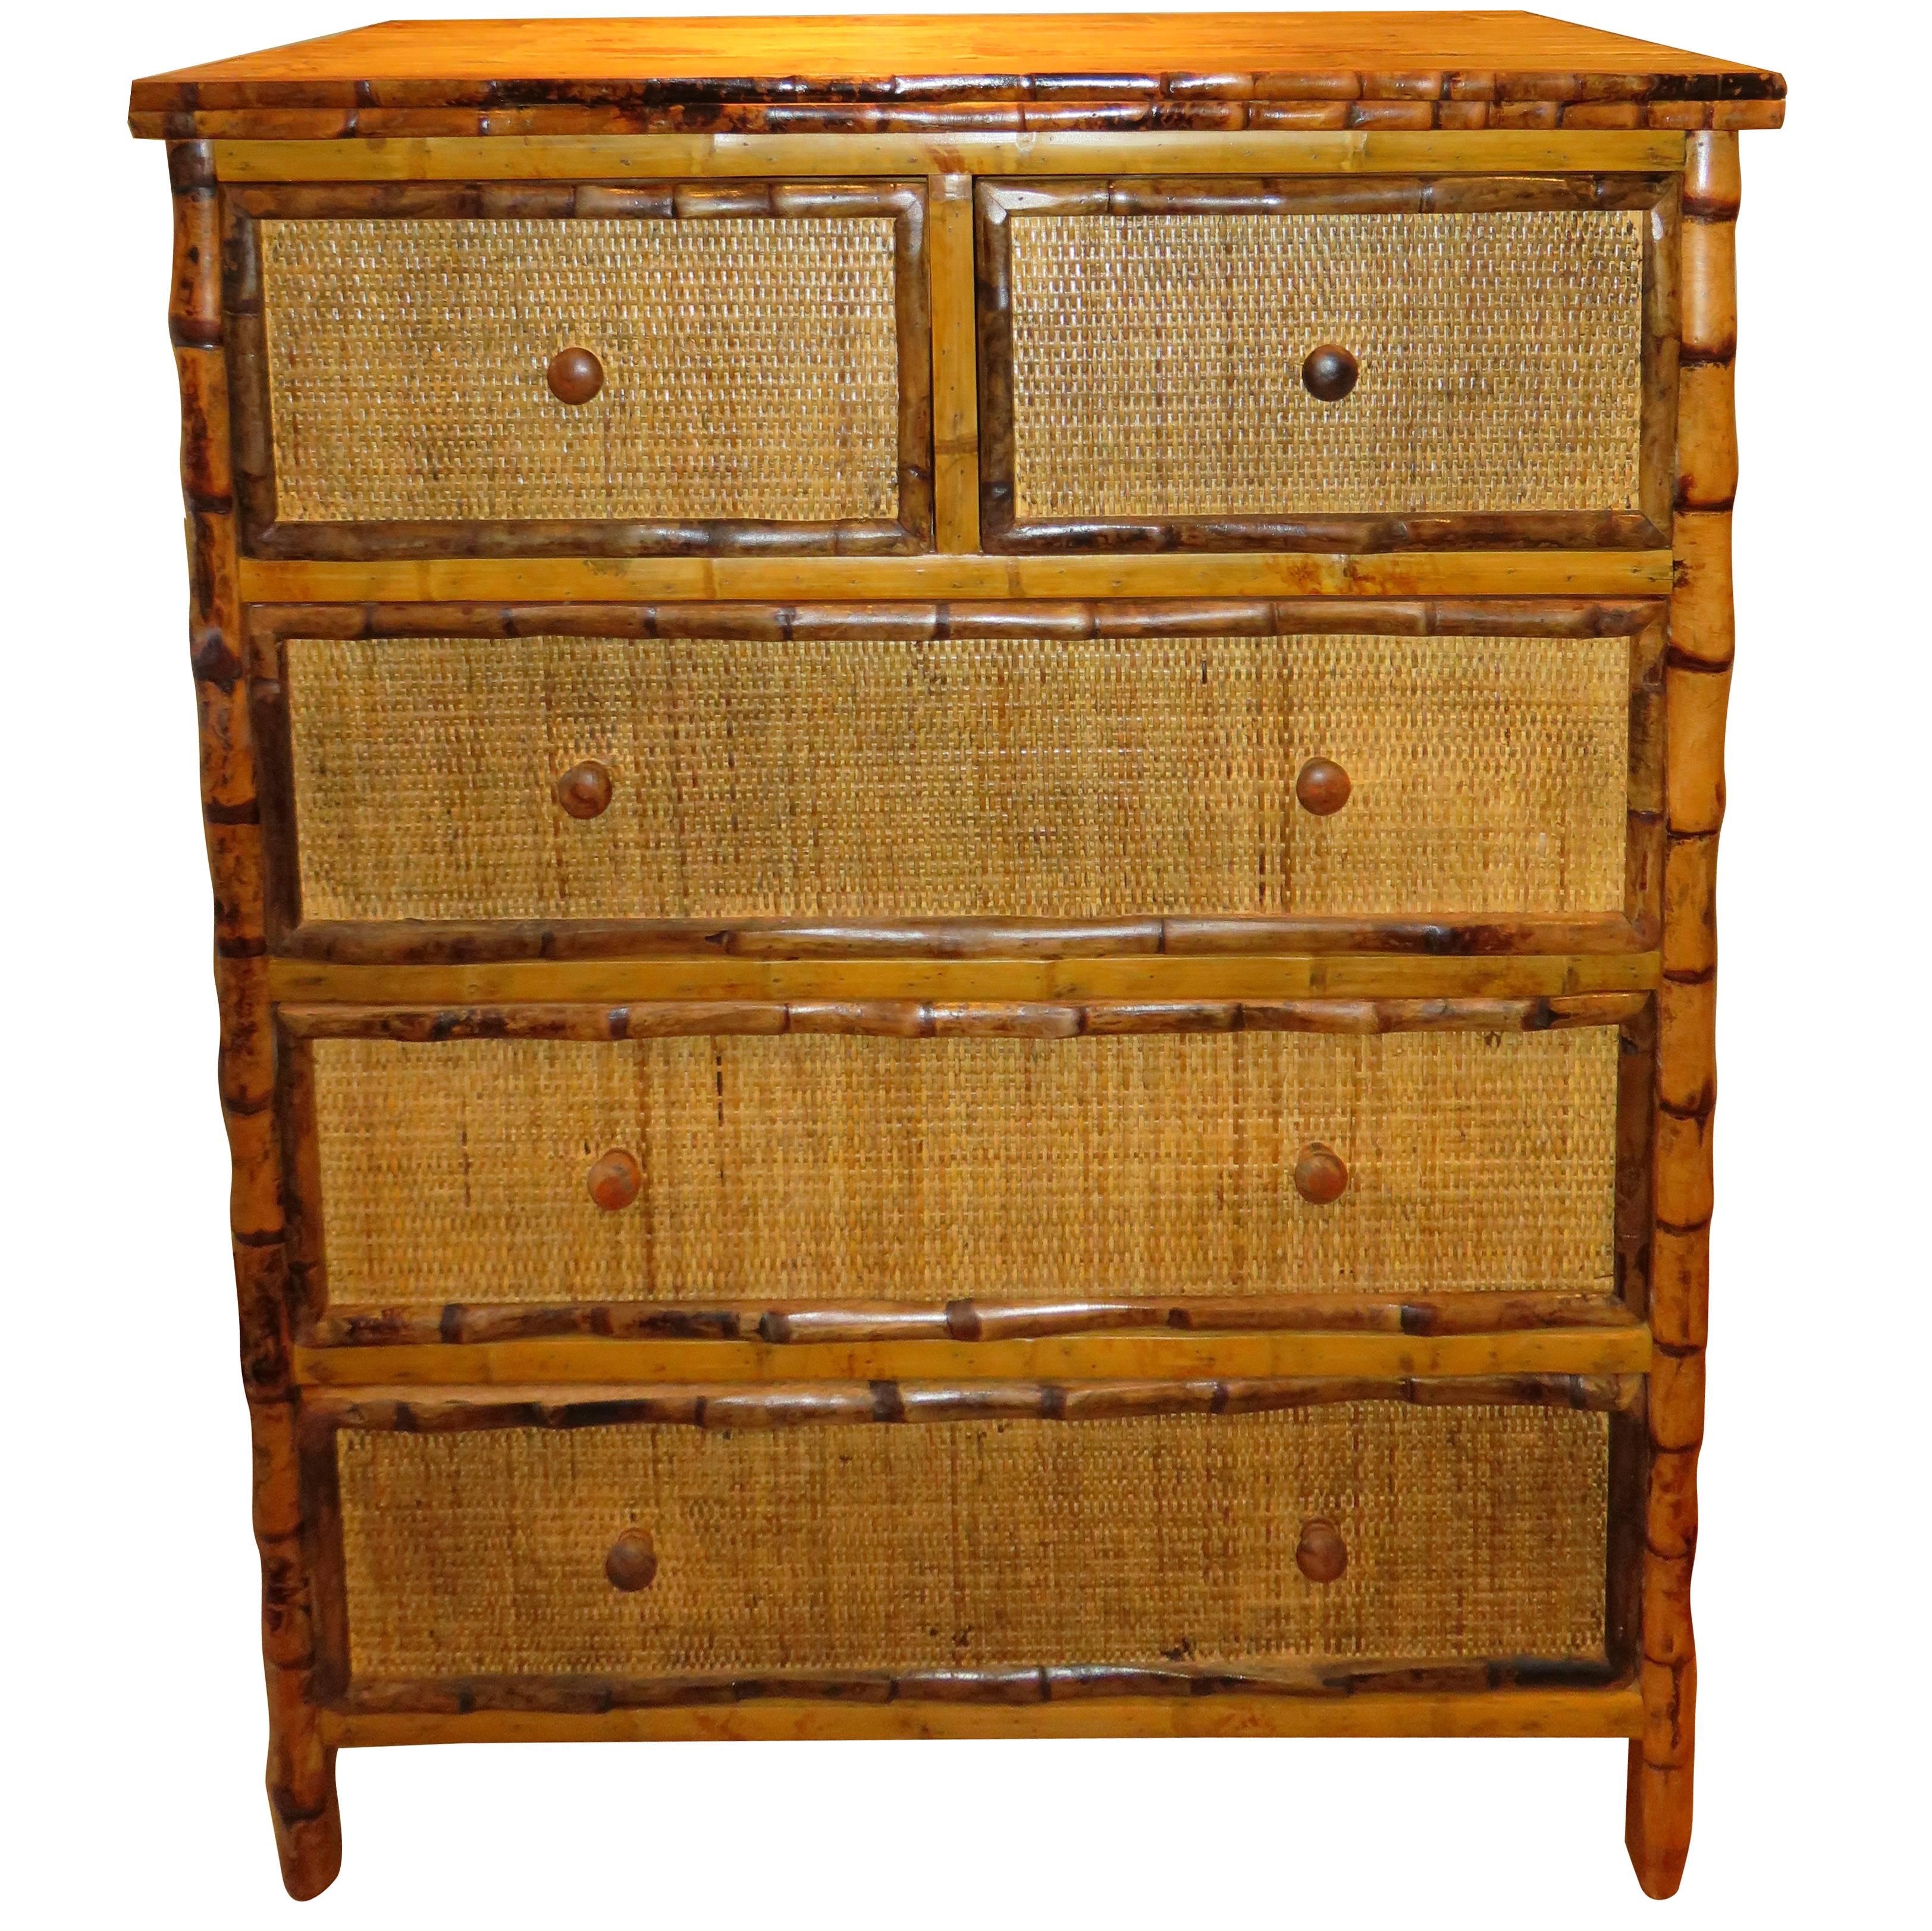 Bamboo and Cane Dresser/Drawers